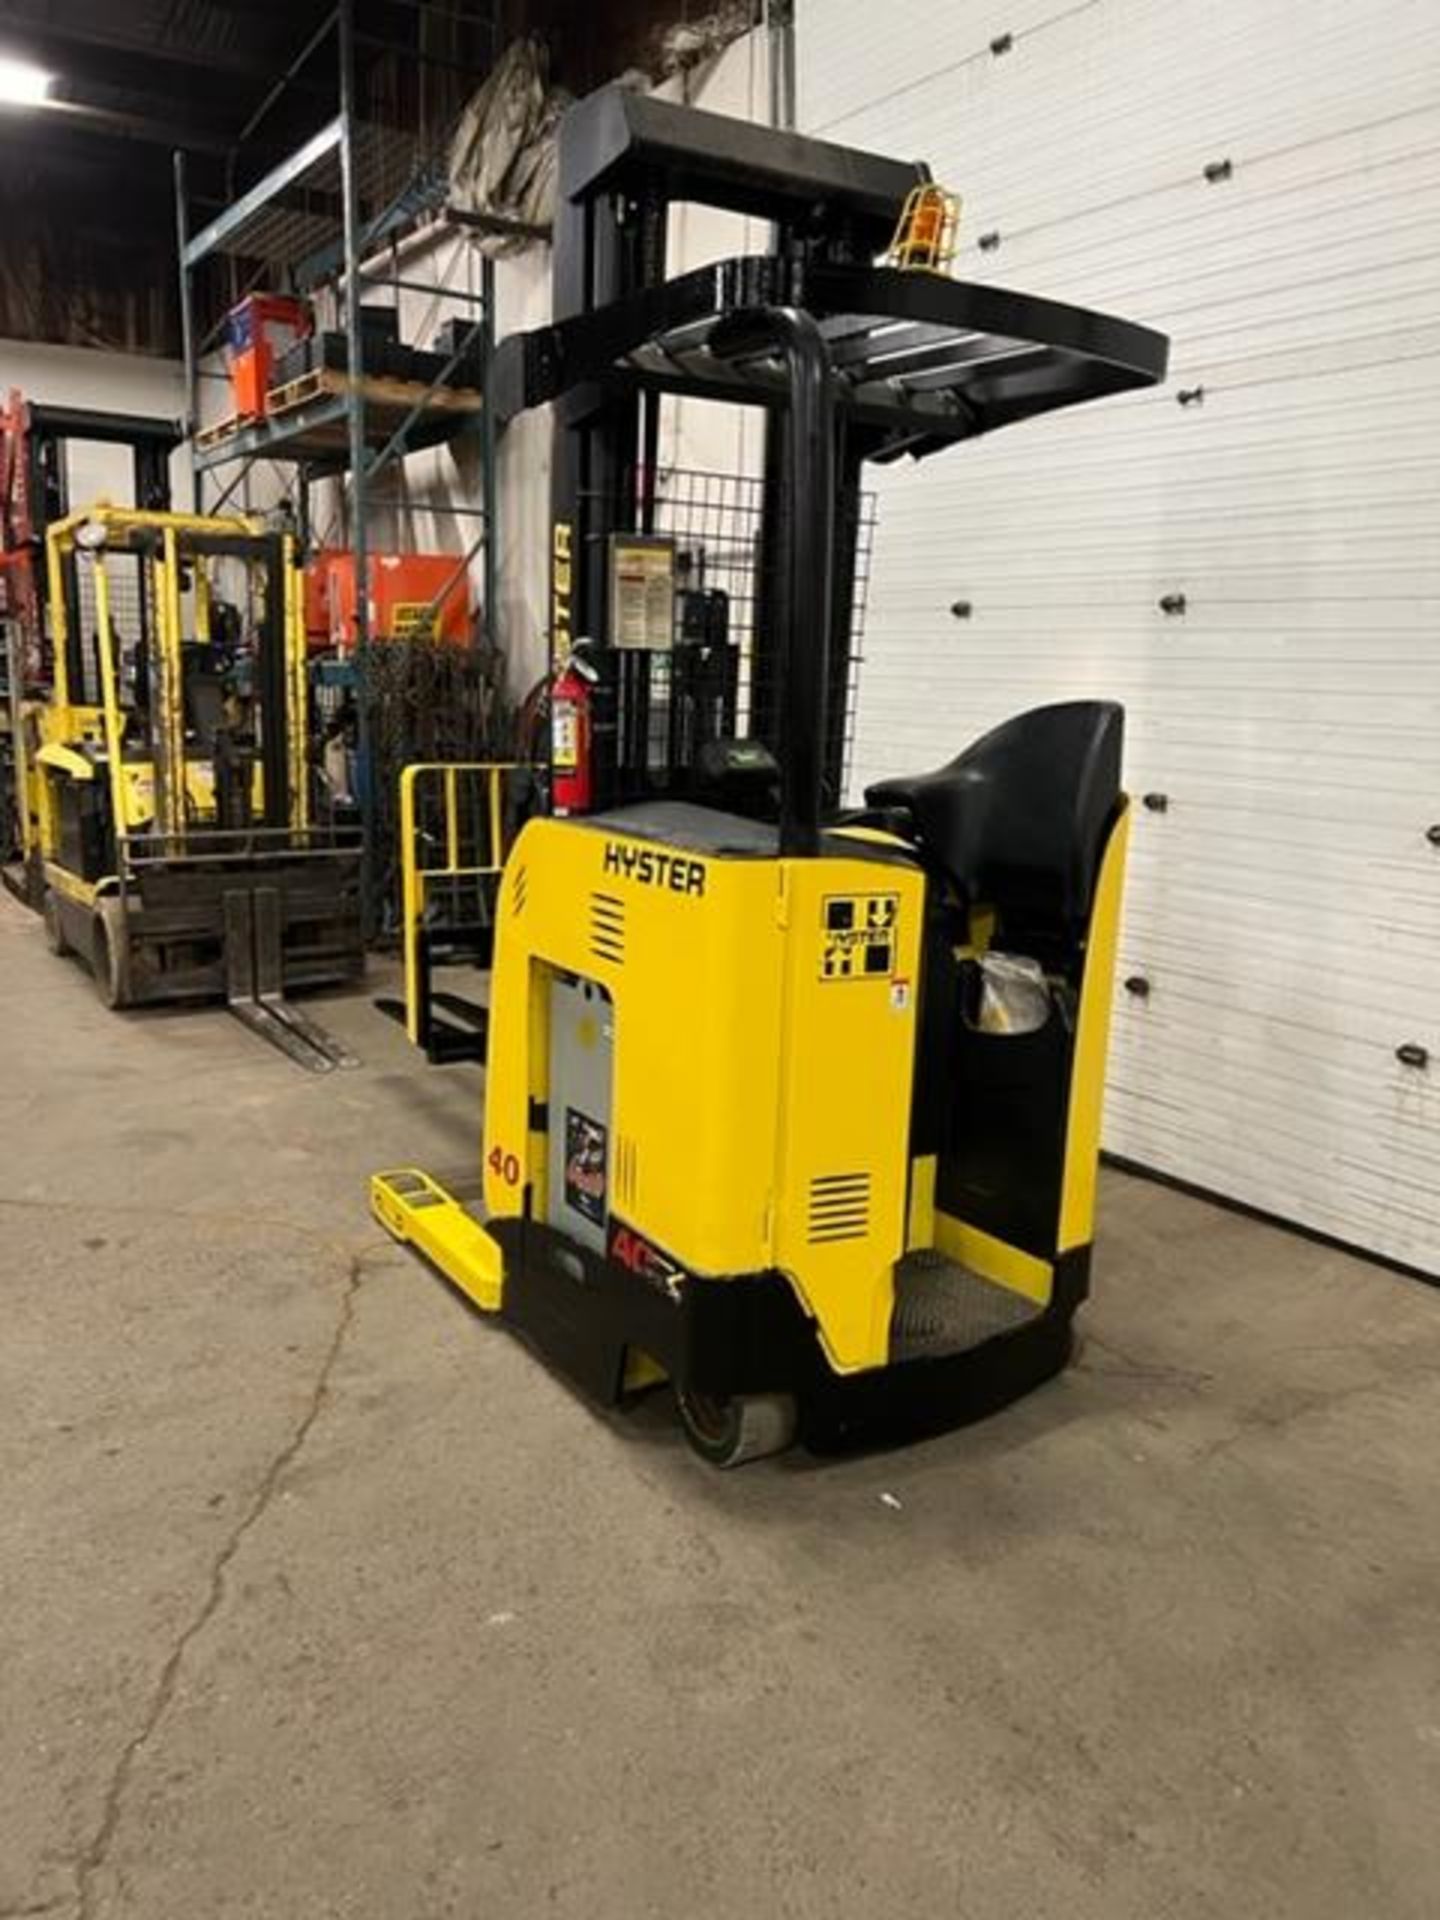 FREE CUSTOMS - 2011 Hyster Reach Truck Pallet Lifter REACH TRUCK 4000lbs capacity electric MINT - Image 3 of 3